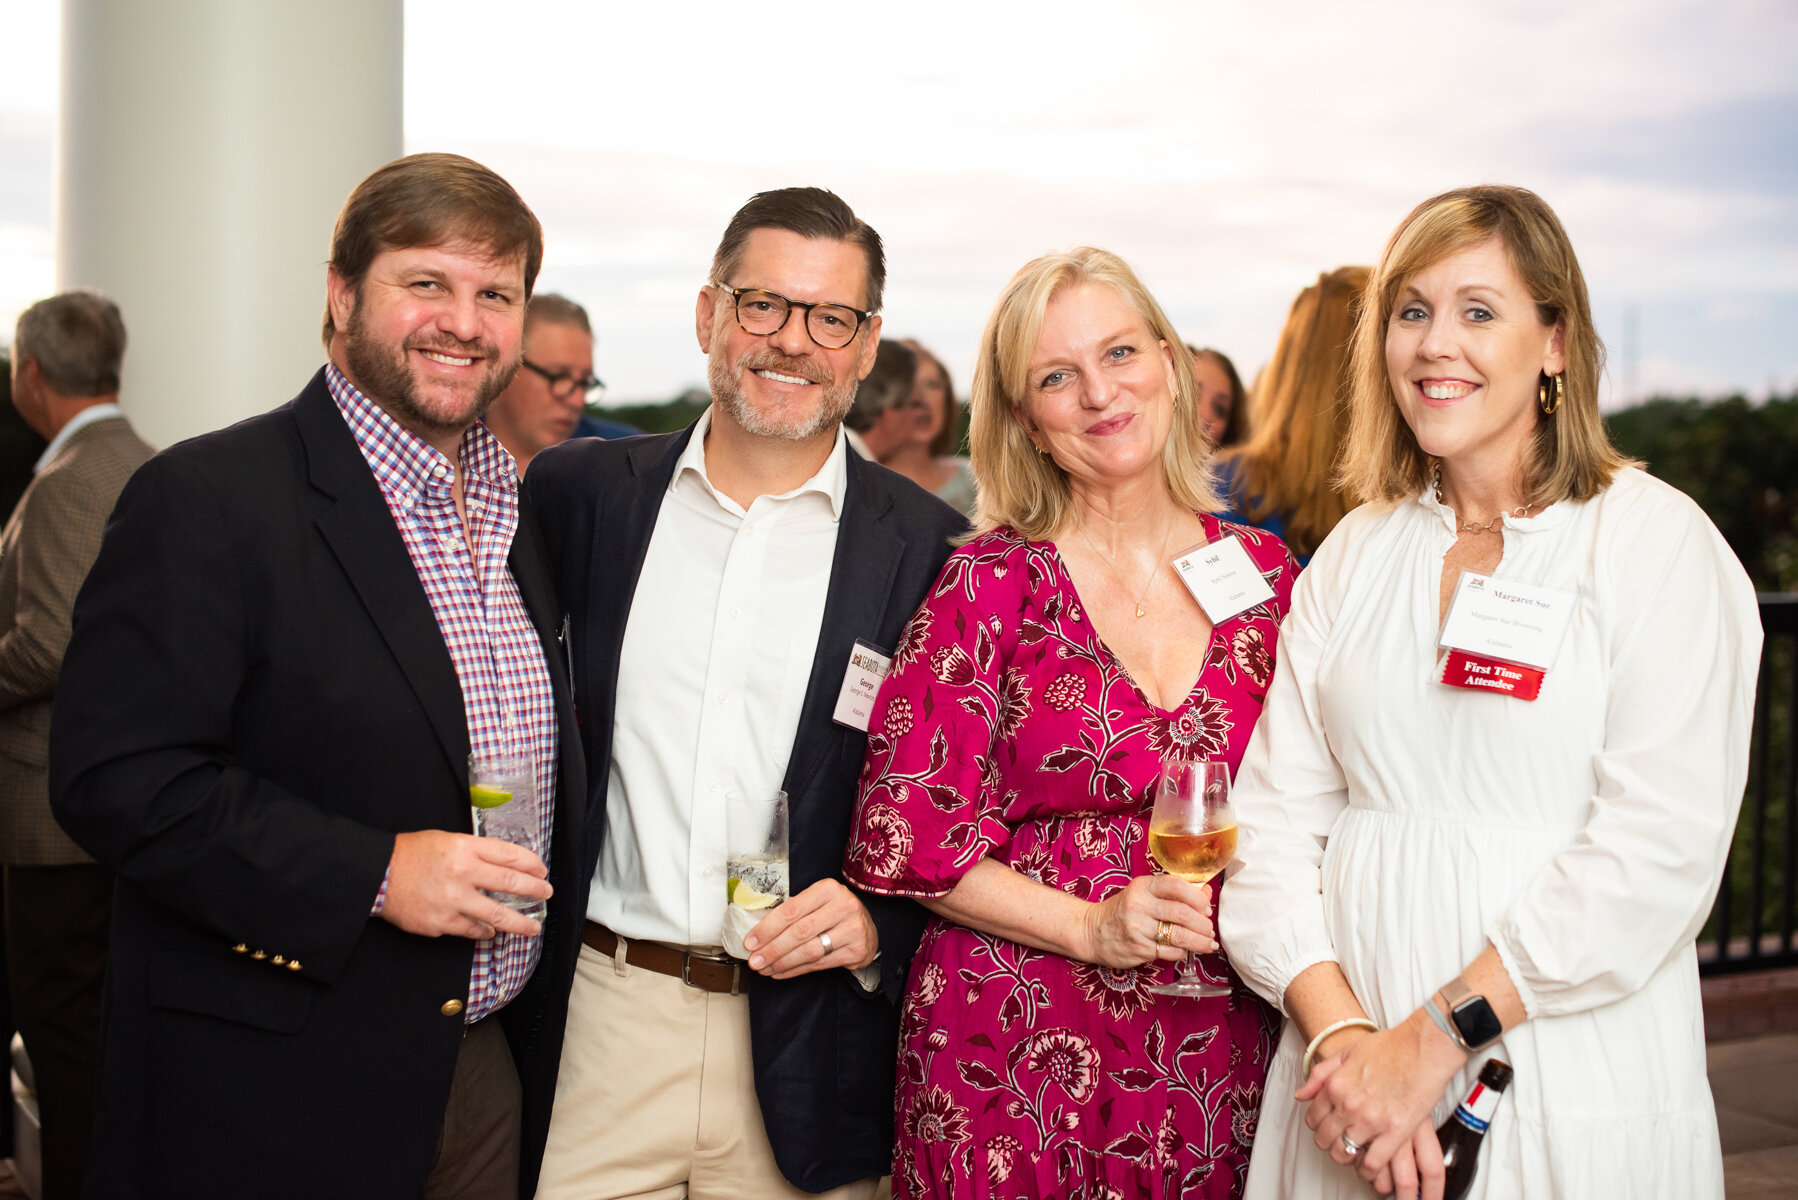 Corporate event photography by Reese Moore Photography